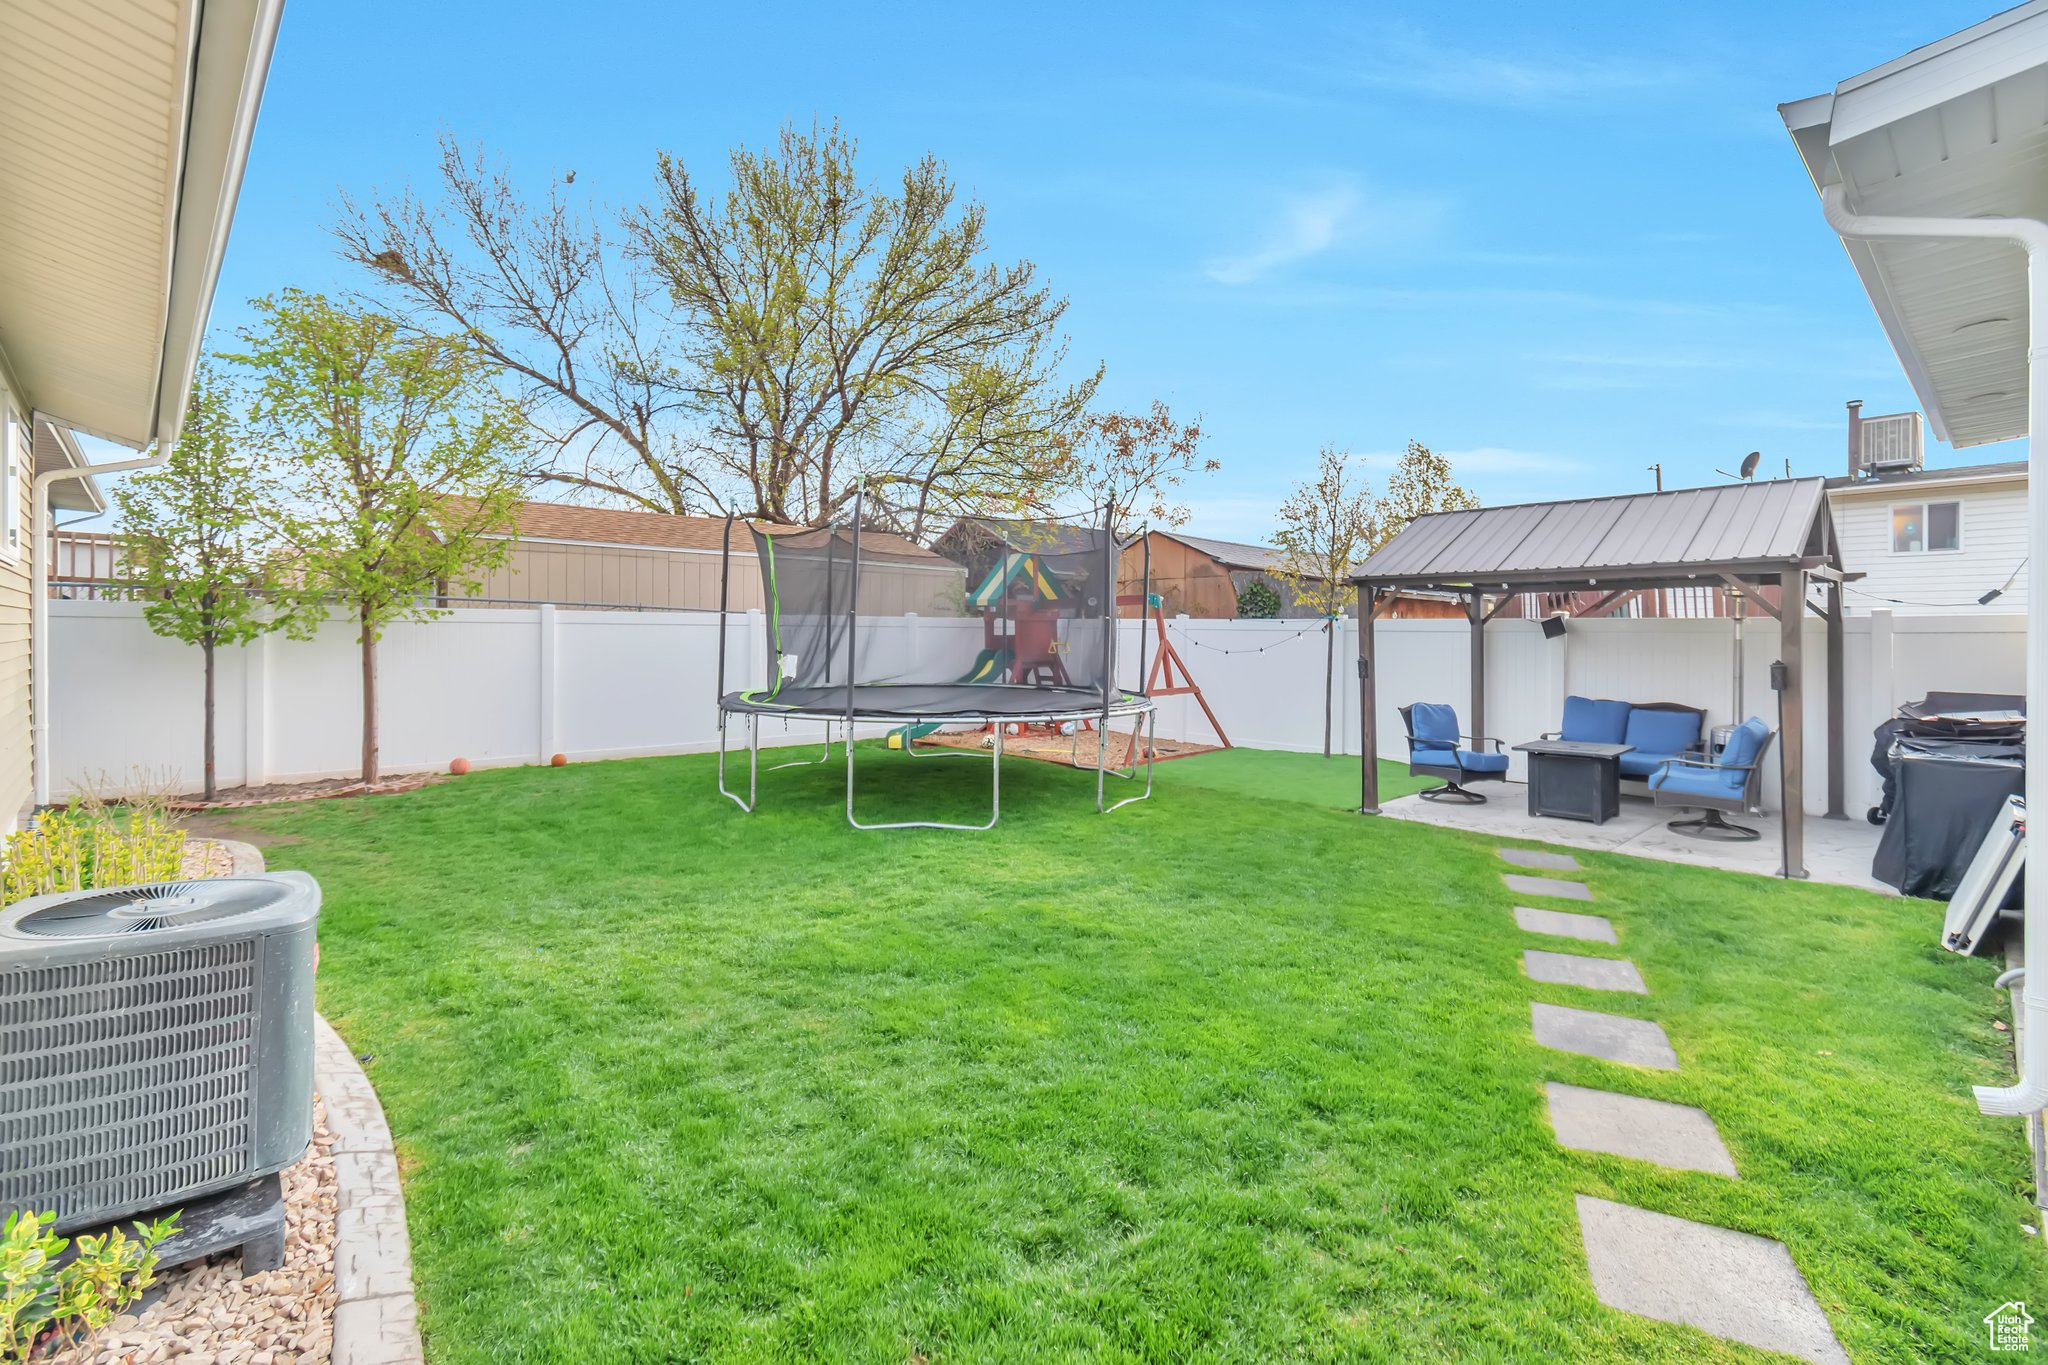 View of yard with a patio area, a trampoline, outdoor lounge area, central AC, and a gazebo